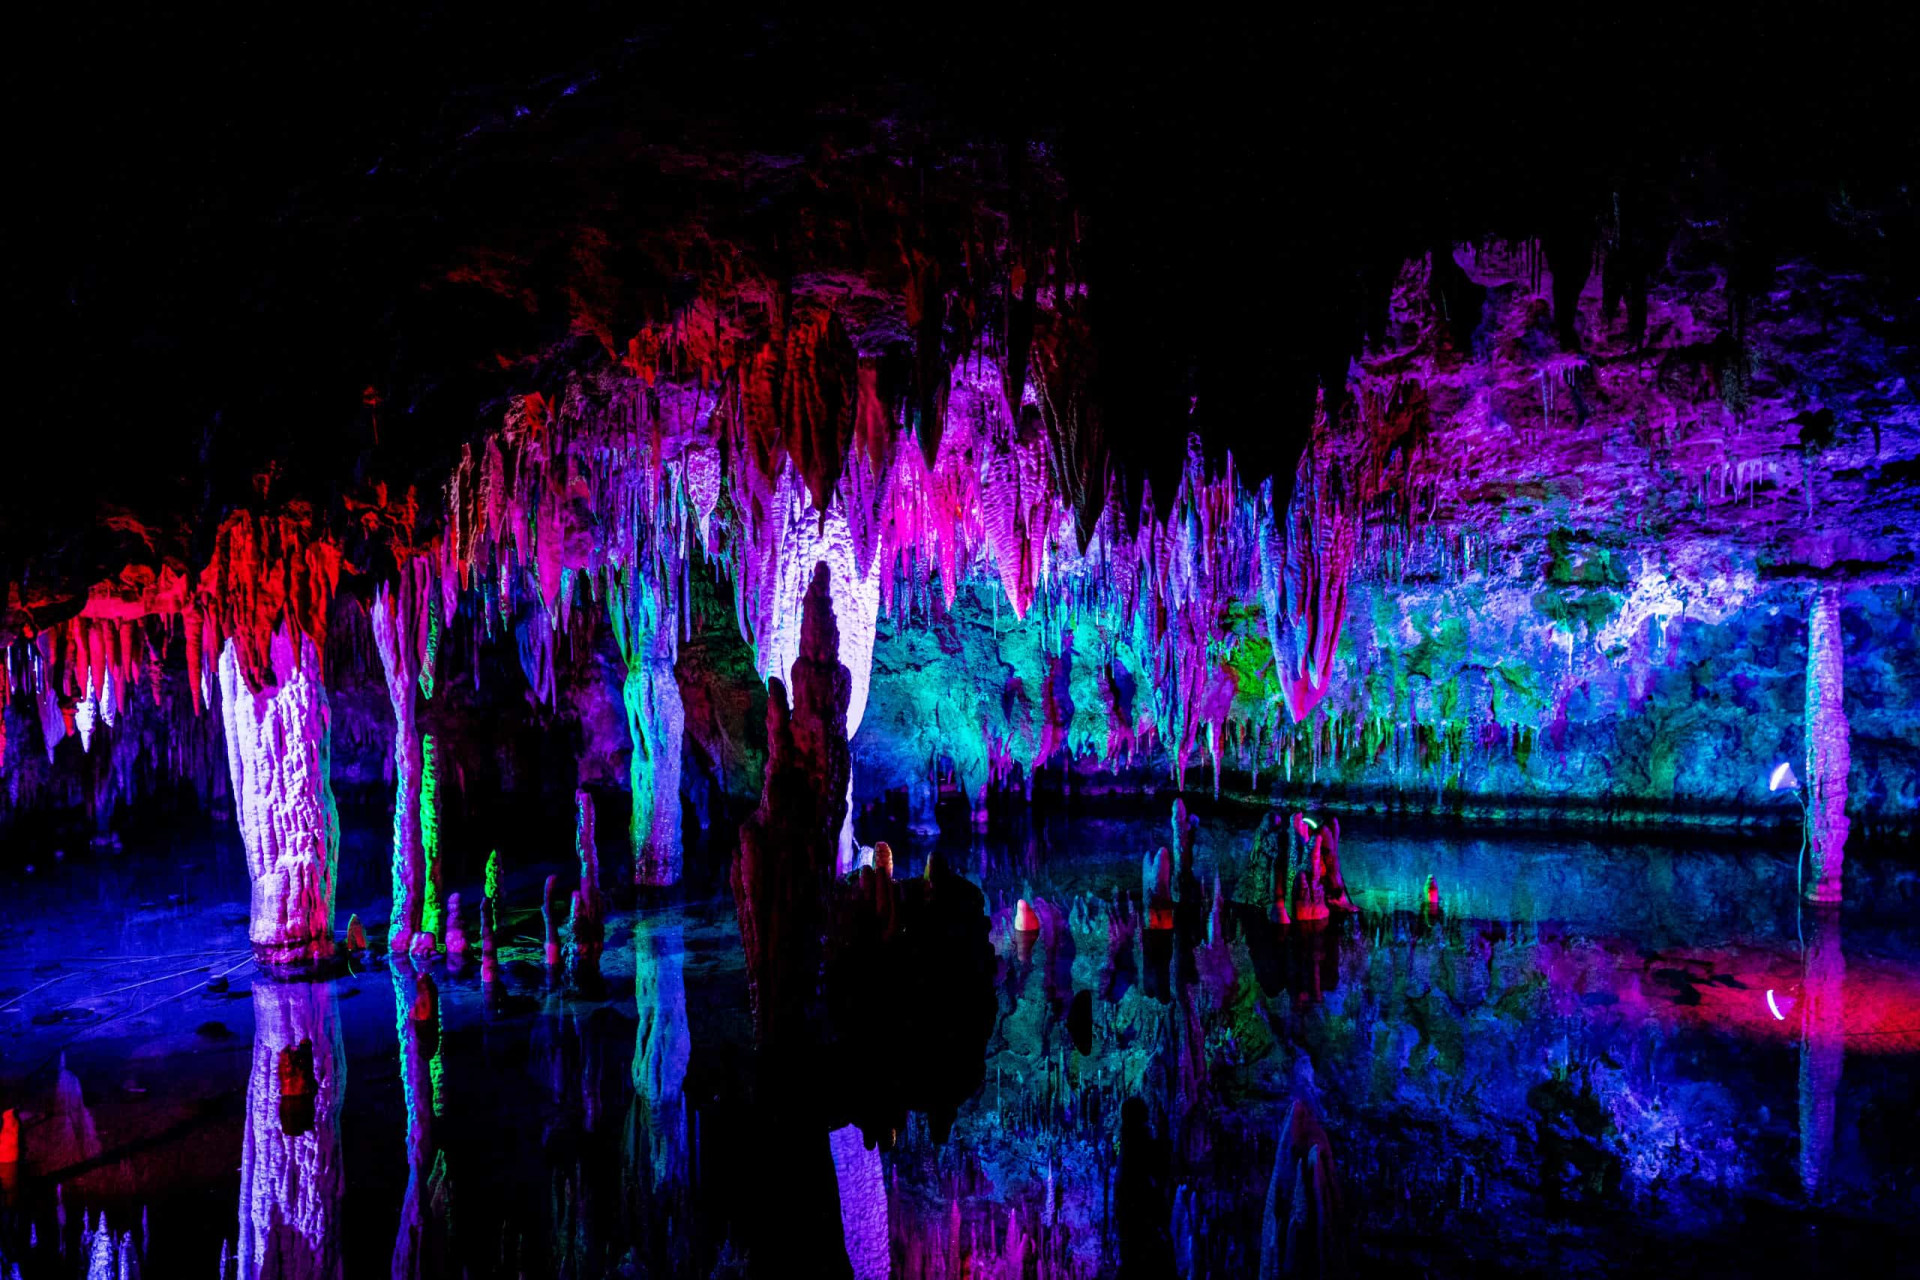 <p>Meramec State Park, around 60 miles (96.5 km) from St. Louis, is famous for its network of canyons and caves. Fisher Cave, filled with stalactites and stalagmites, is the most eerily impressive.</p><p>You may also like:<a href="https://www.starsinsider.com/n/391126?utm_source=msn.com&utm_medium=display&utm_campaign=referral_description&utm_content=486112v1en-us"> The most shockingly honest celebrity responses </a></p>